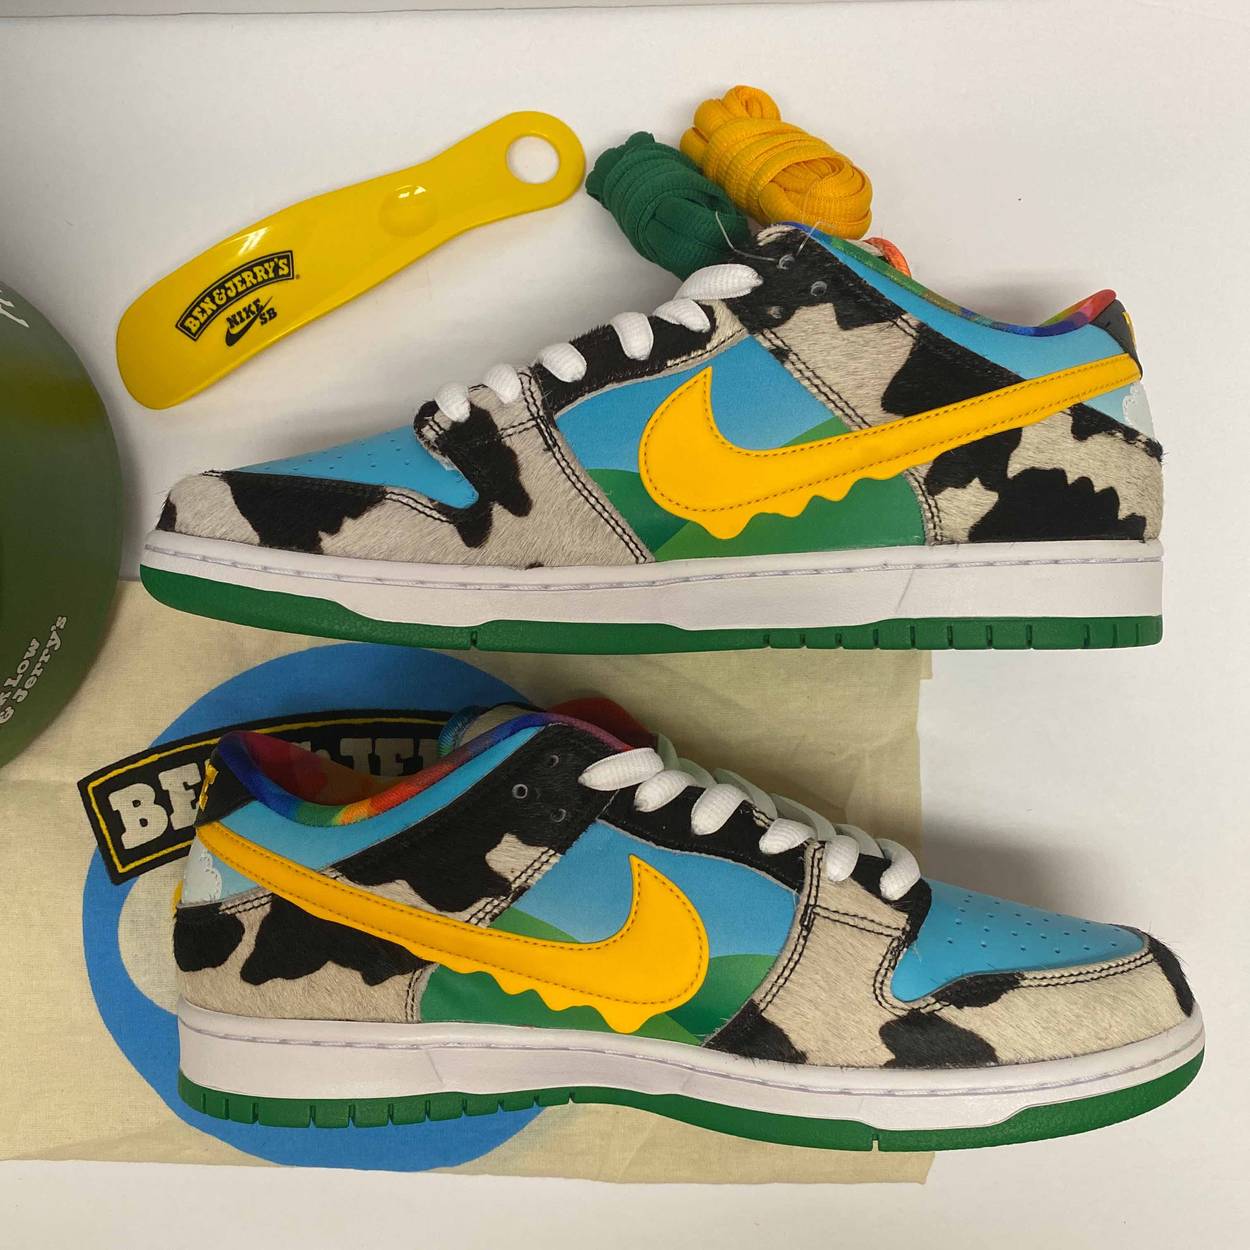 Ben & Jerry's x Dunk Low SB 'Chunky Dunky' Special Ice Cream Box - Nike - CU3244 100 SB | GOAT